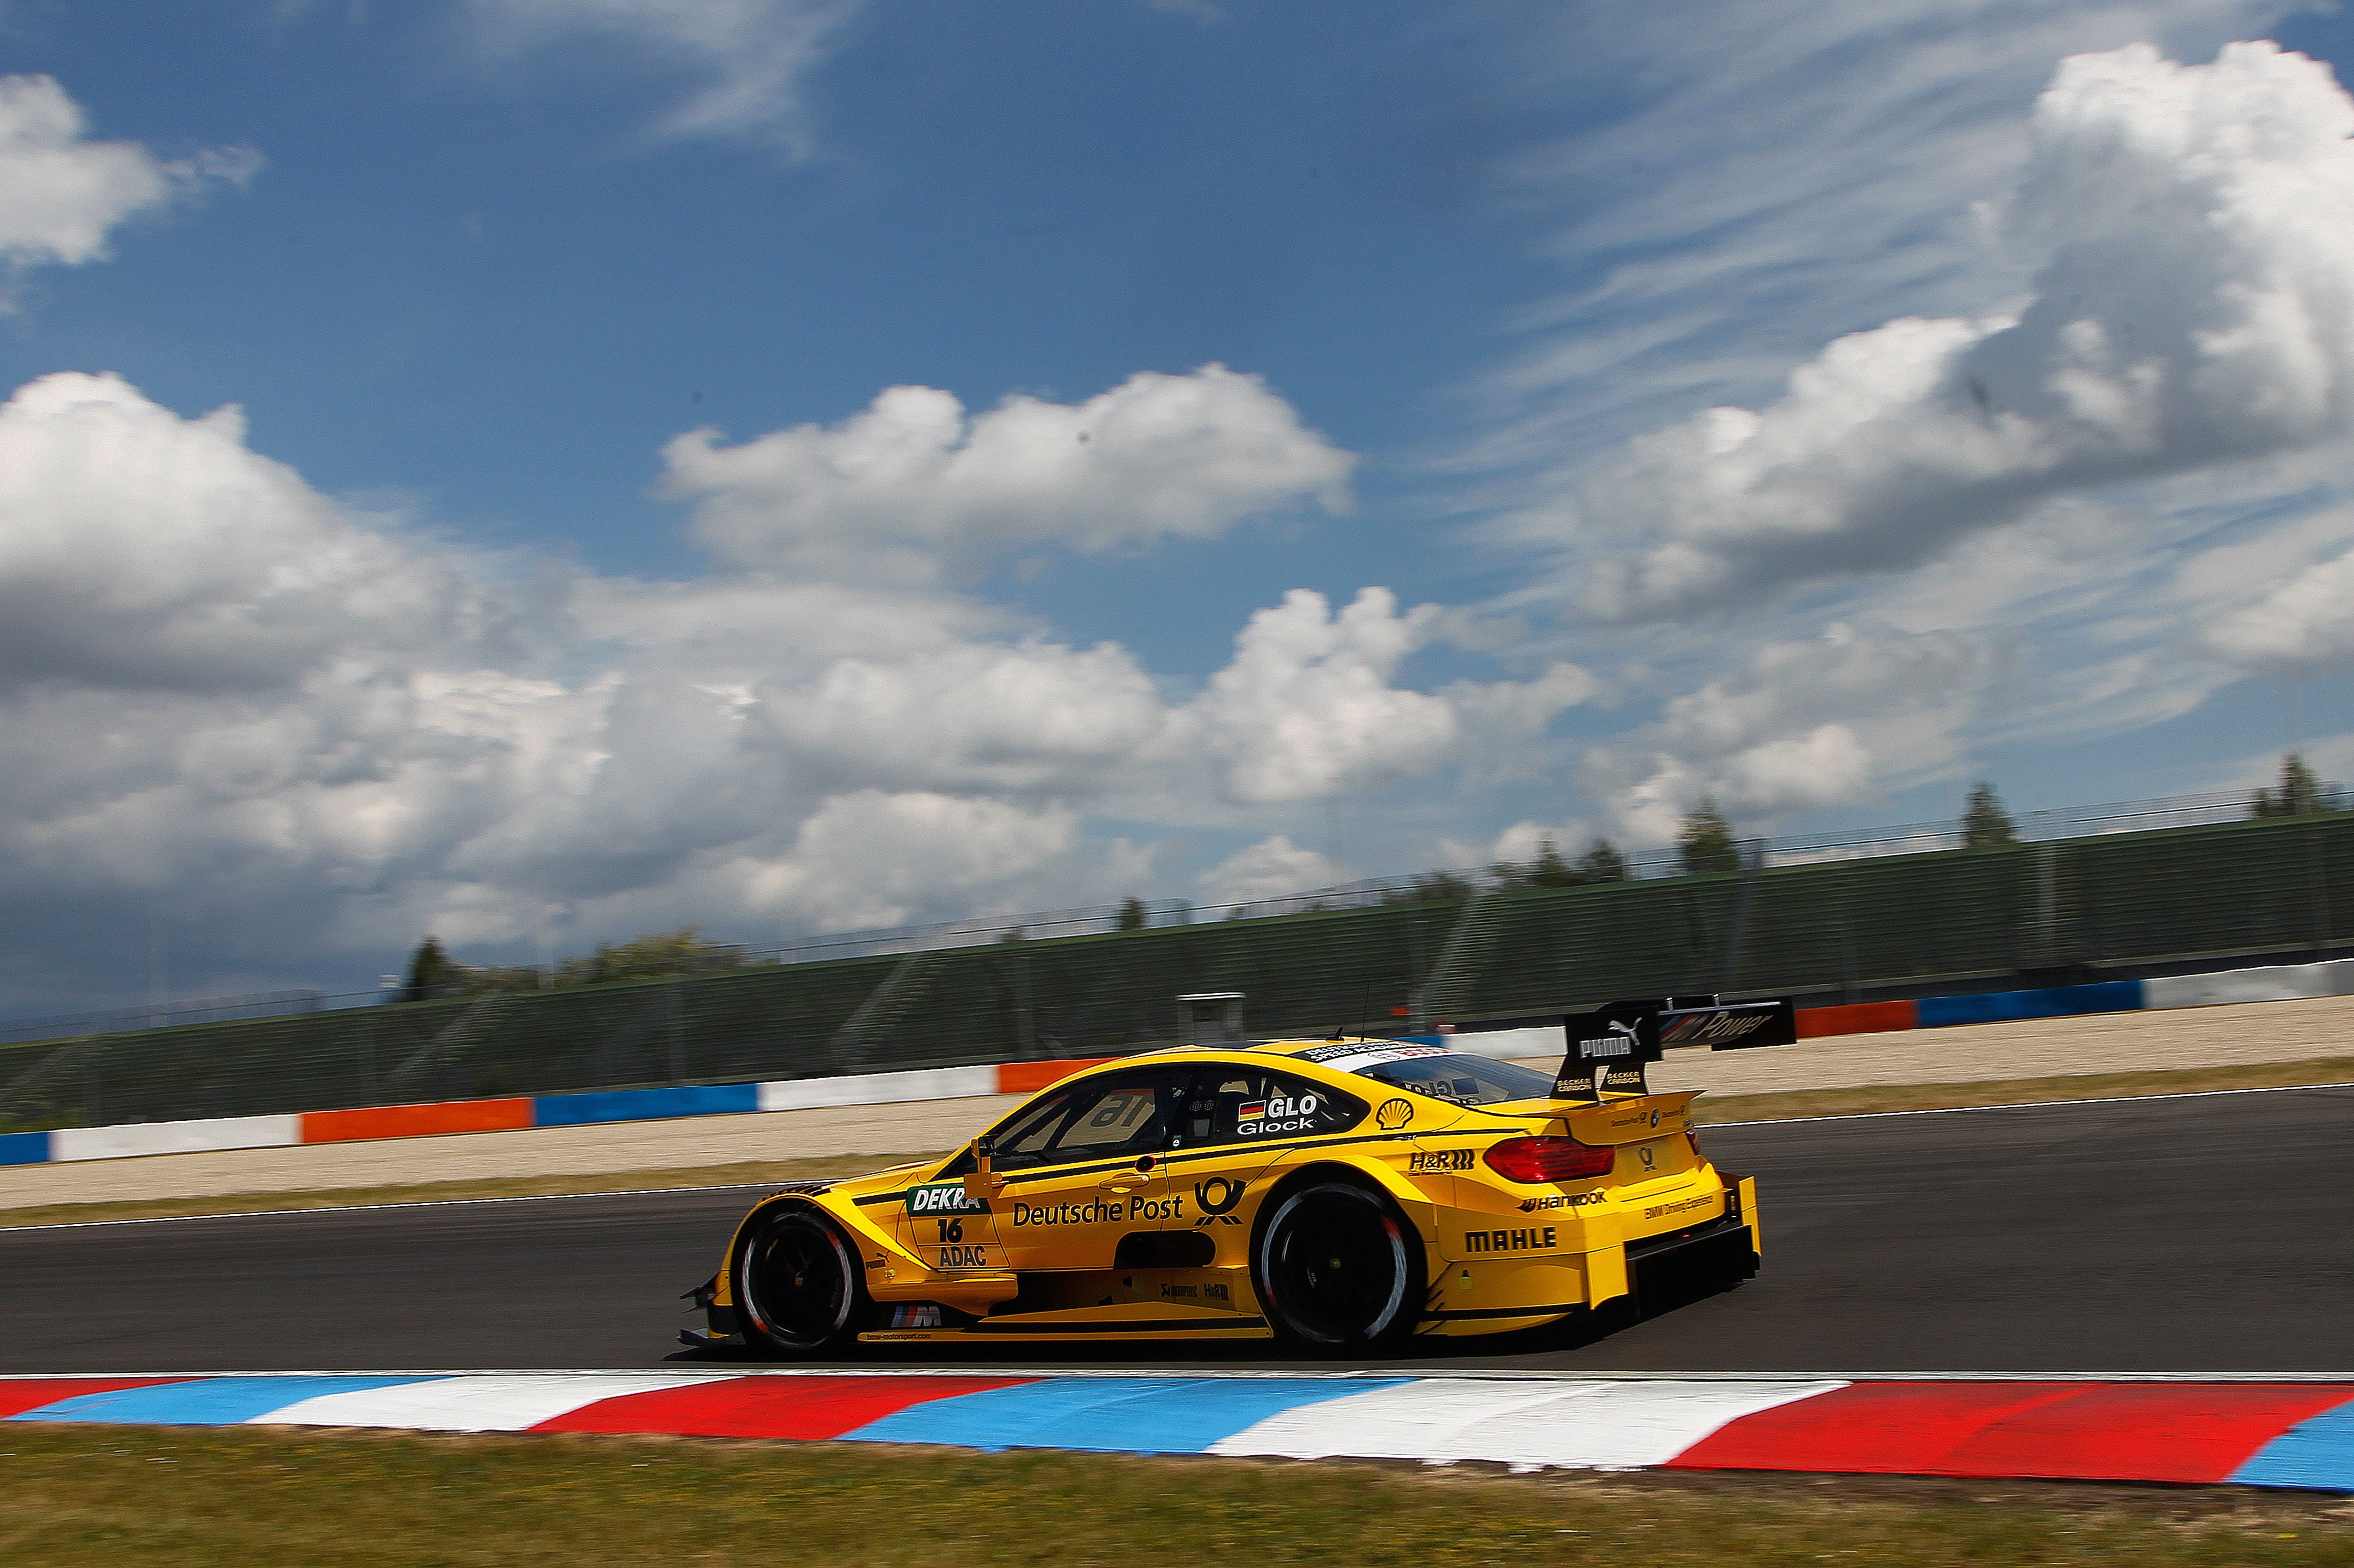 Lausitzring (DE) 30th May 2015. BMW Motorsport, Timo Glock (DE) DEUTSCHE POST BMW M4 DTM. This image is copyright free for editorial use © BMW AG (05/2015).